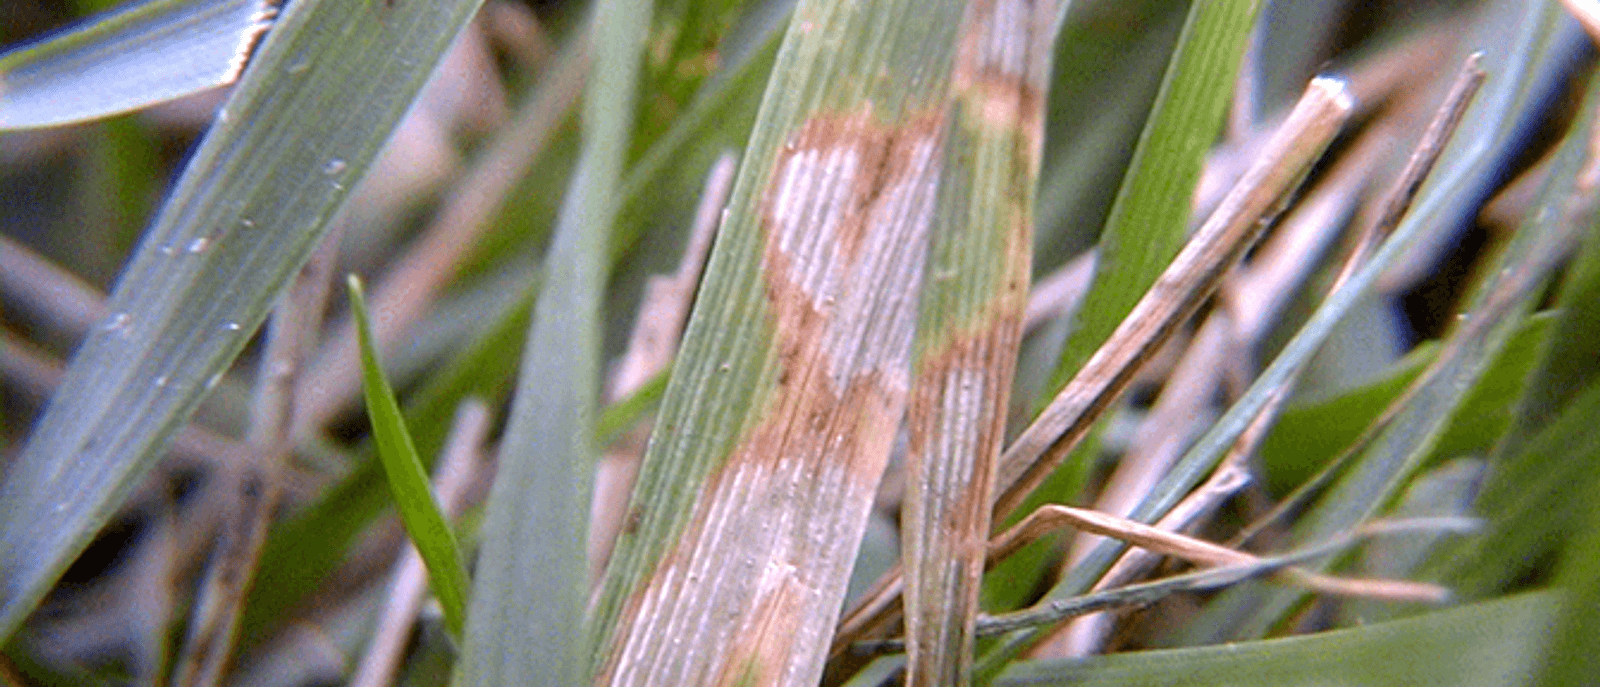 Brown Patch on Grass Blade